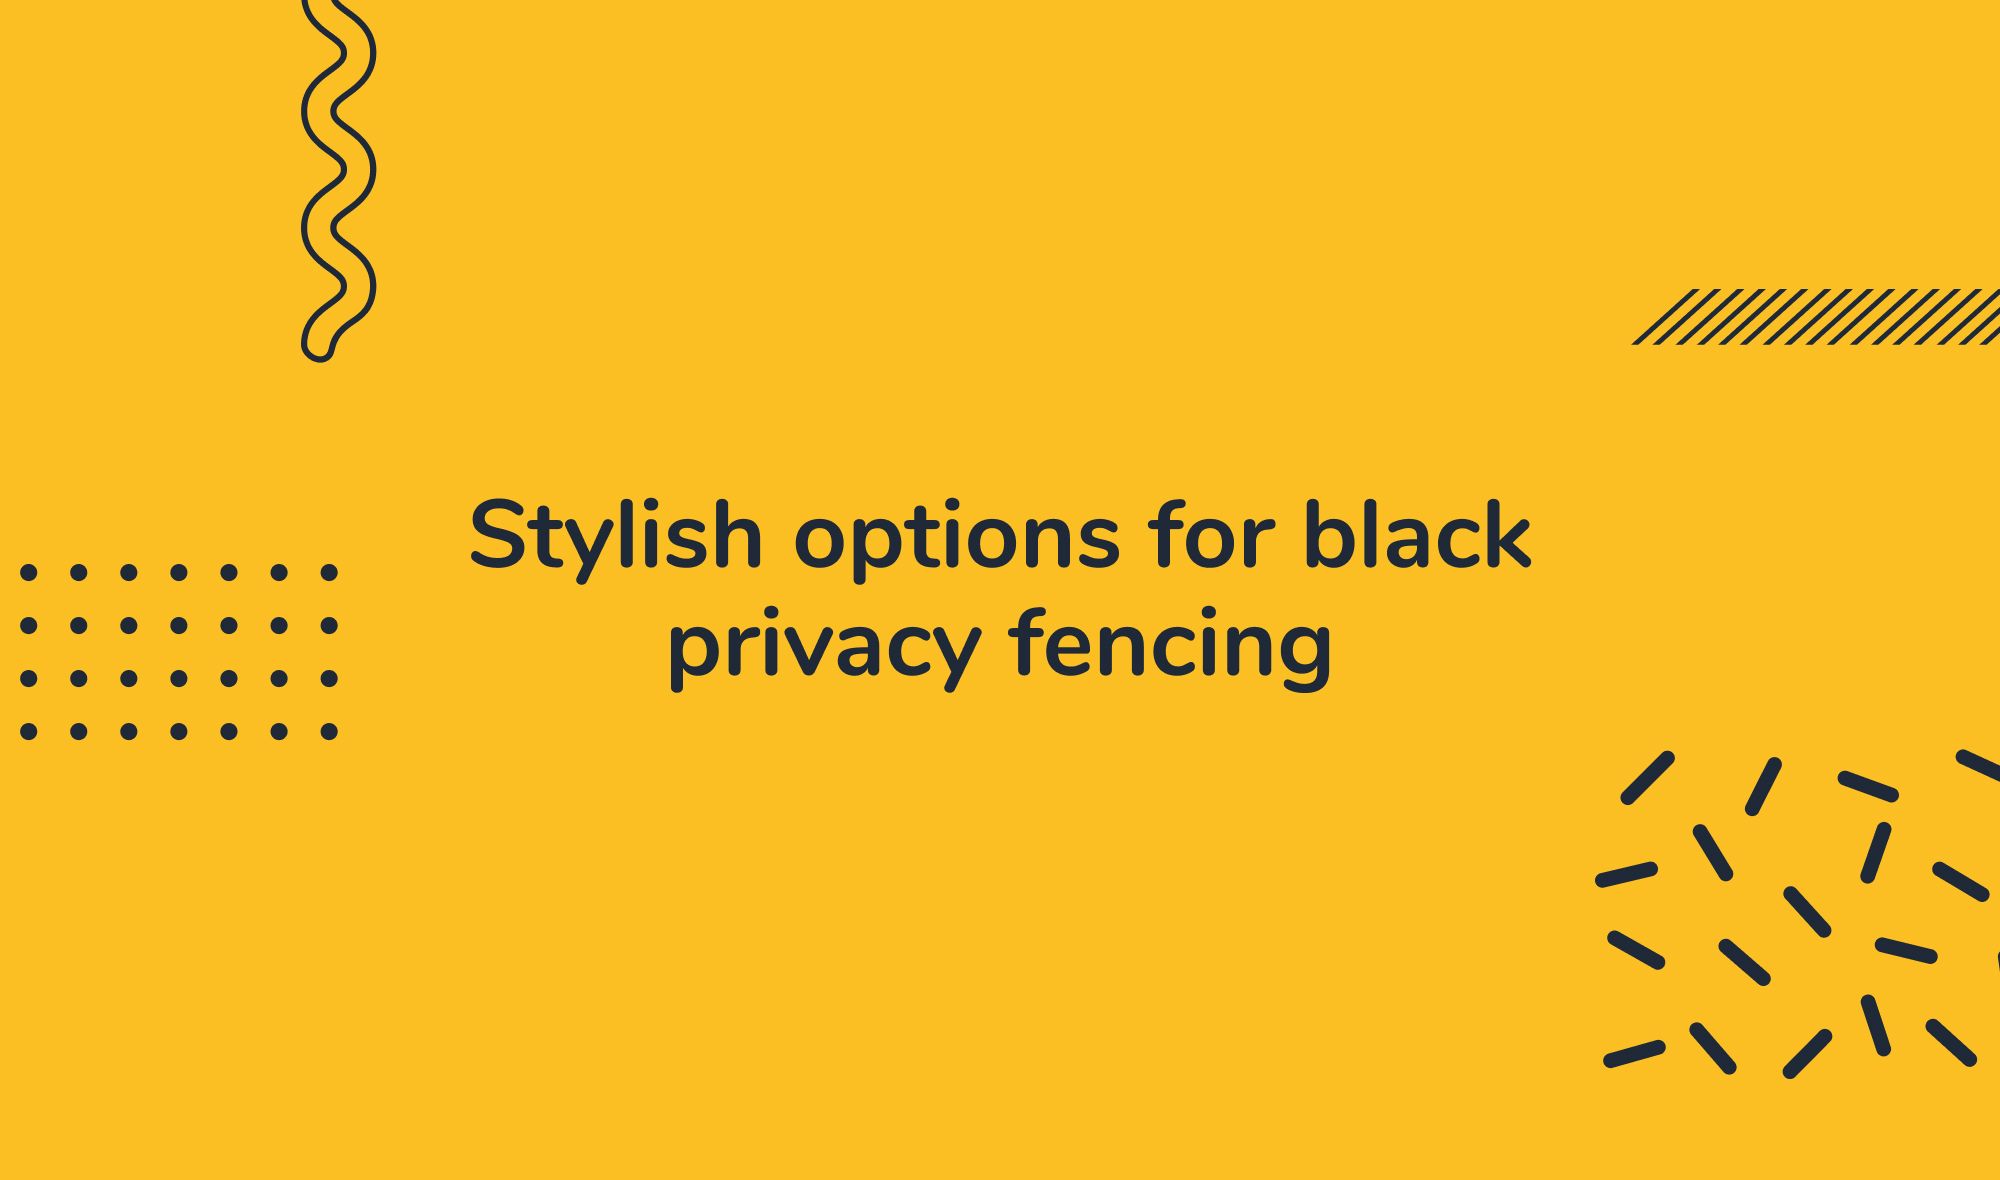 Stylish options for black privacy fencing